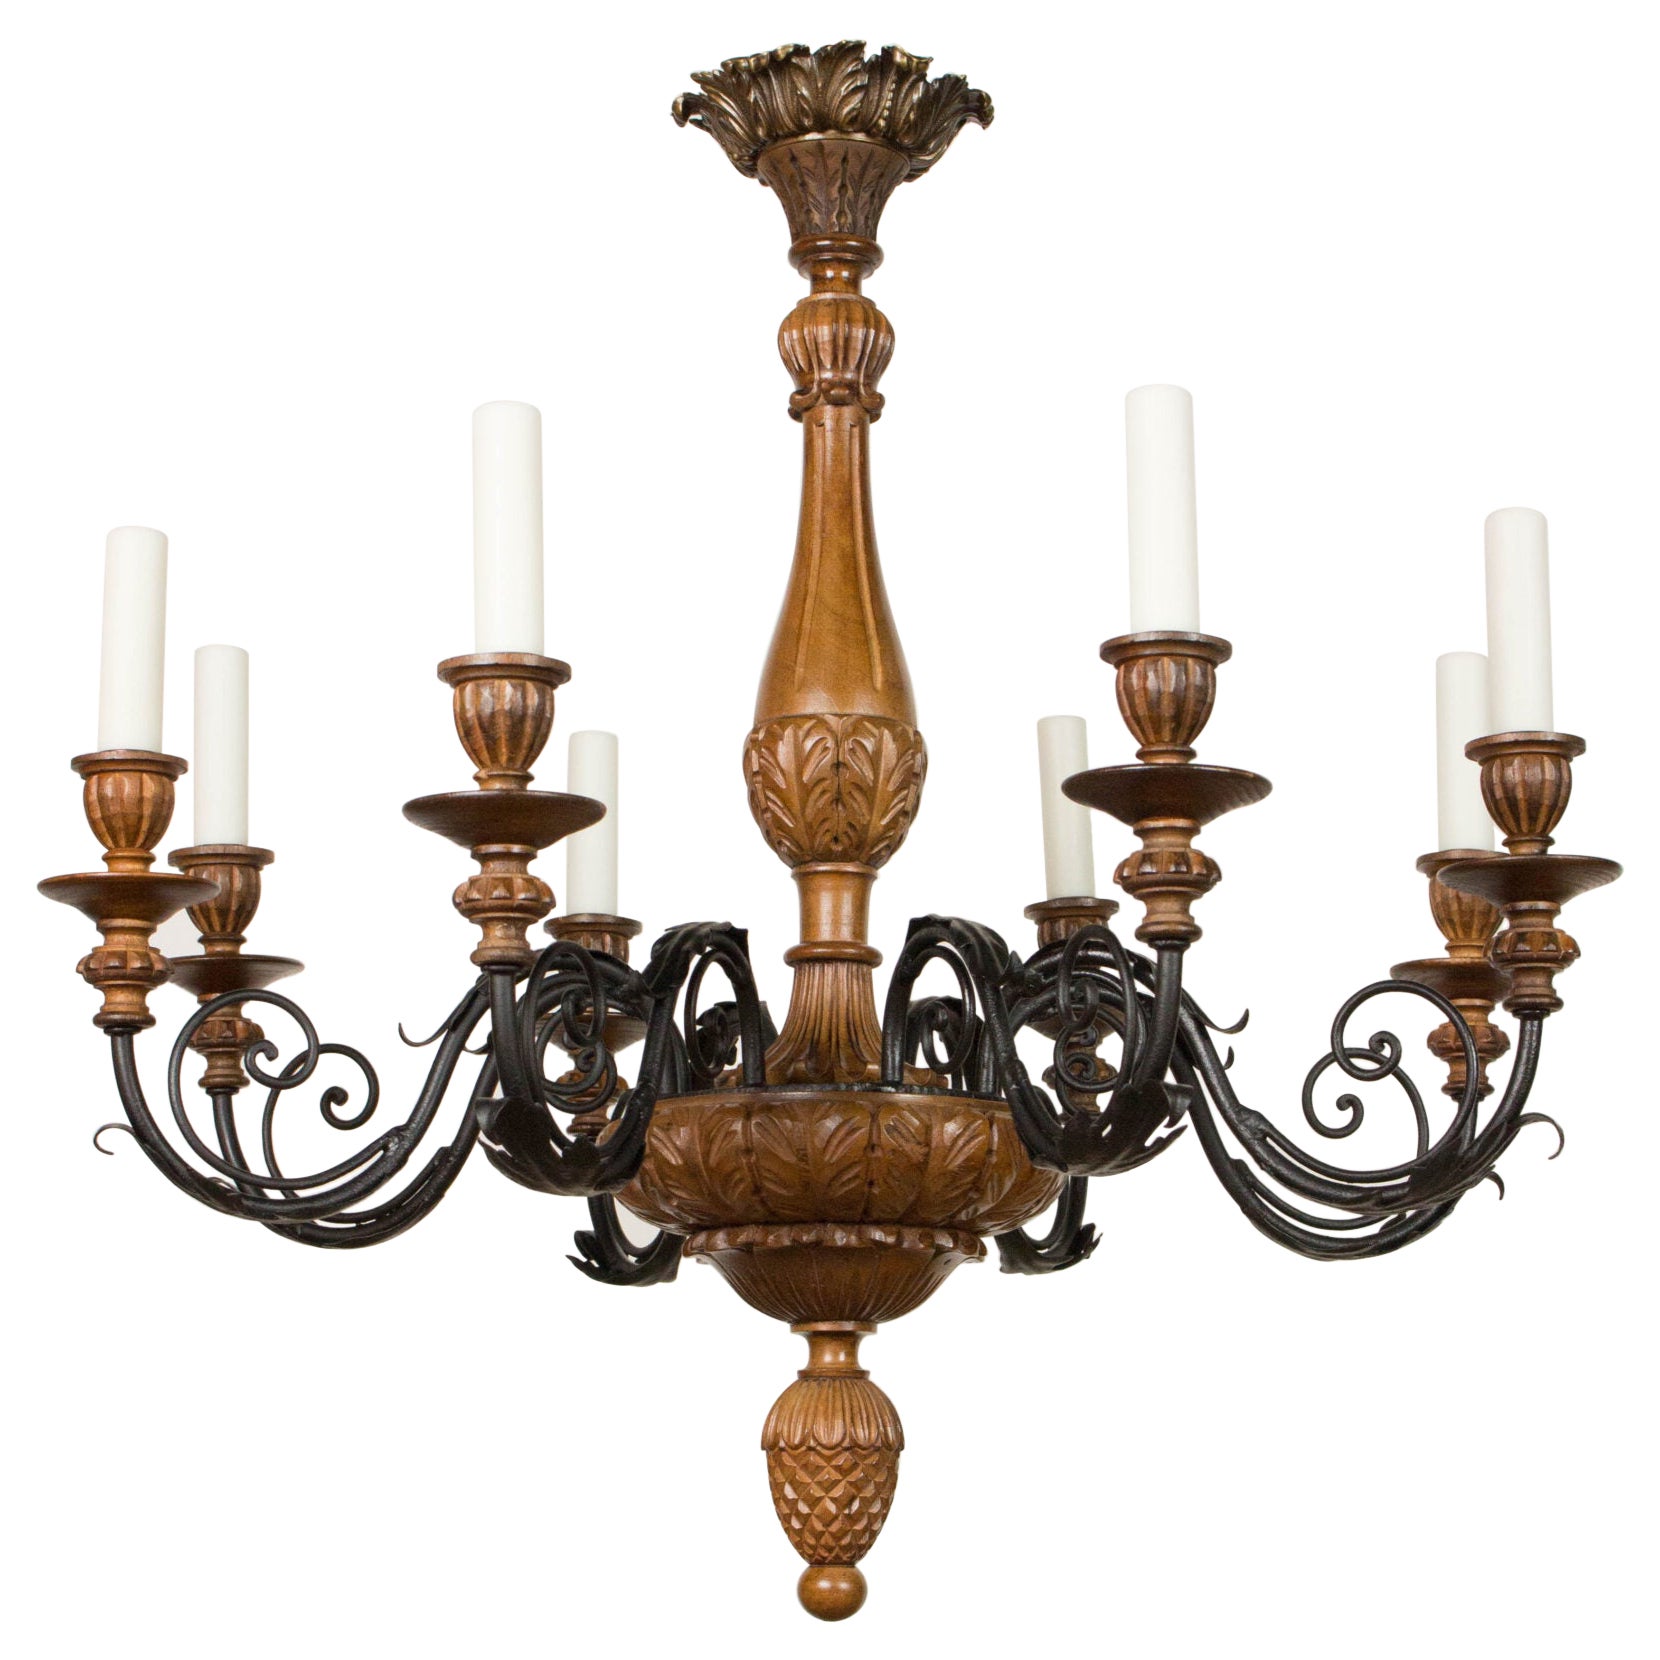 C384 Early 20th Century Italian Carved Wood and Metal Chandelier